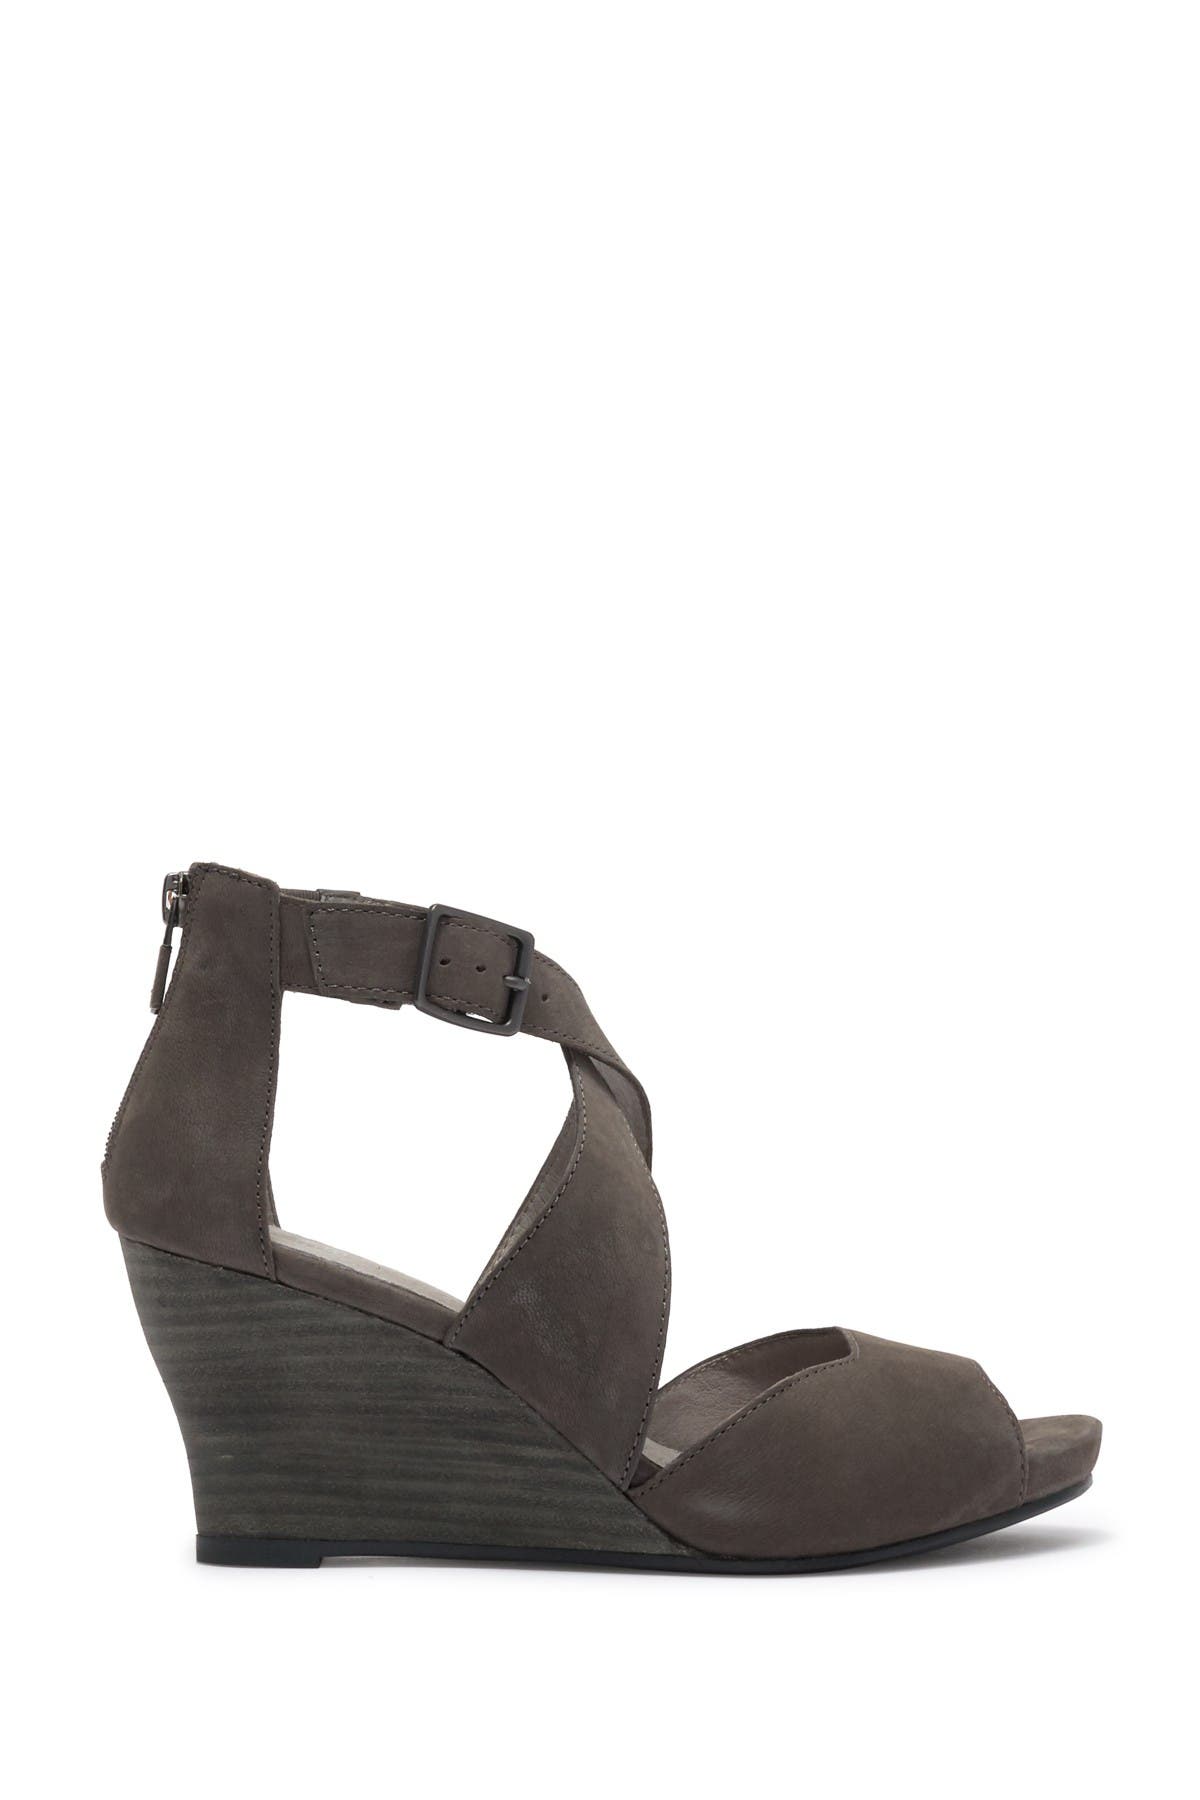 eileen fisher carole shoes